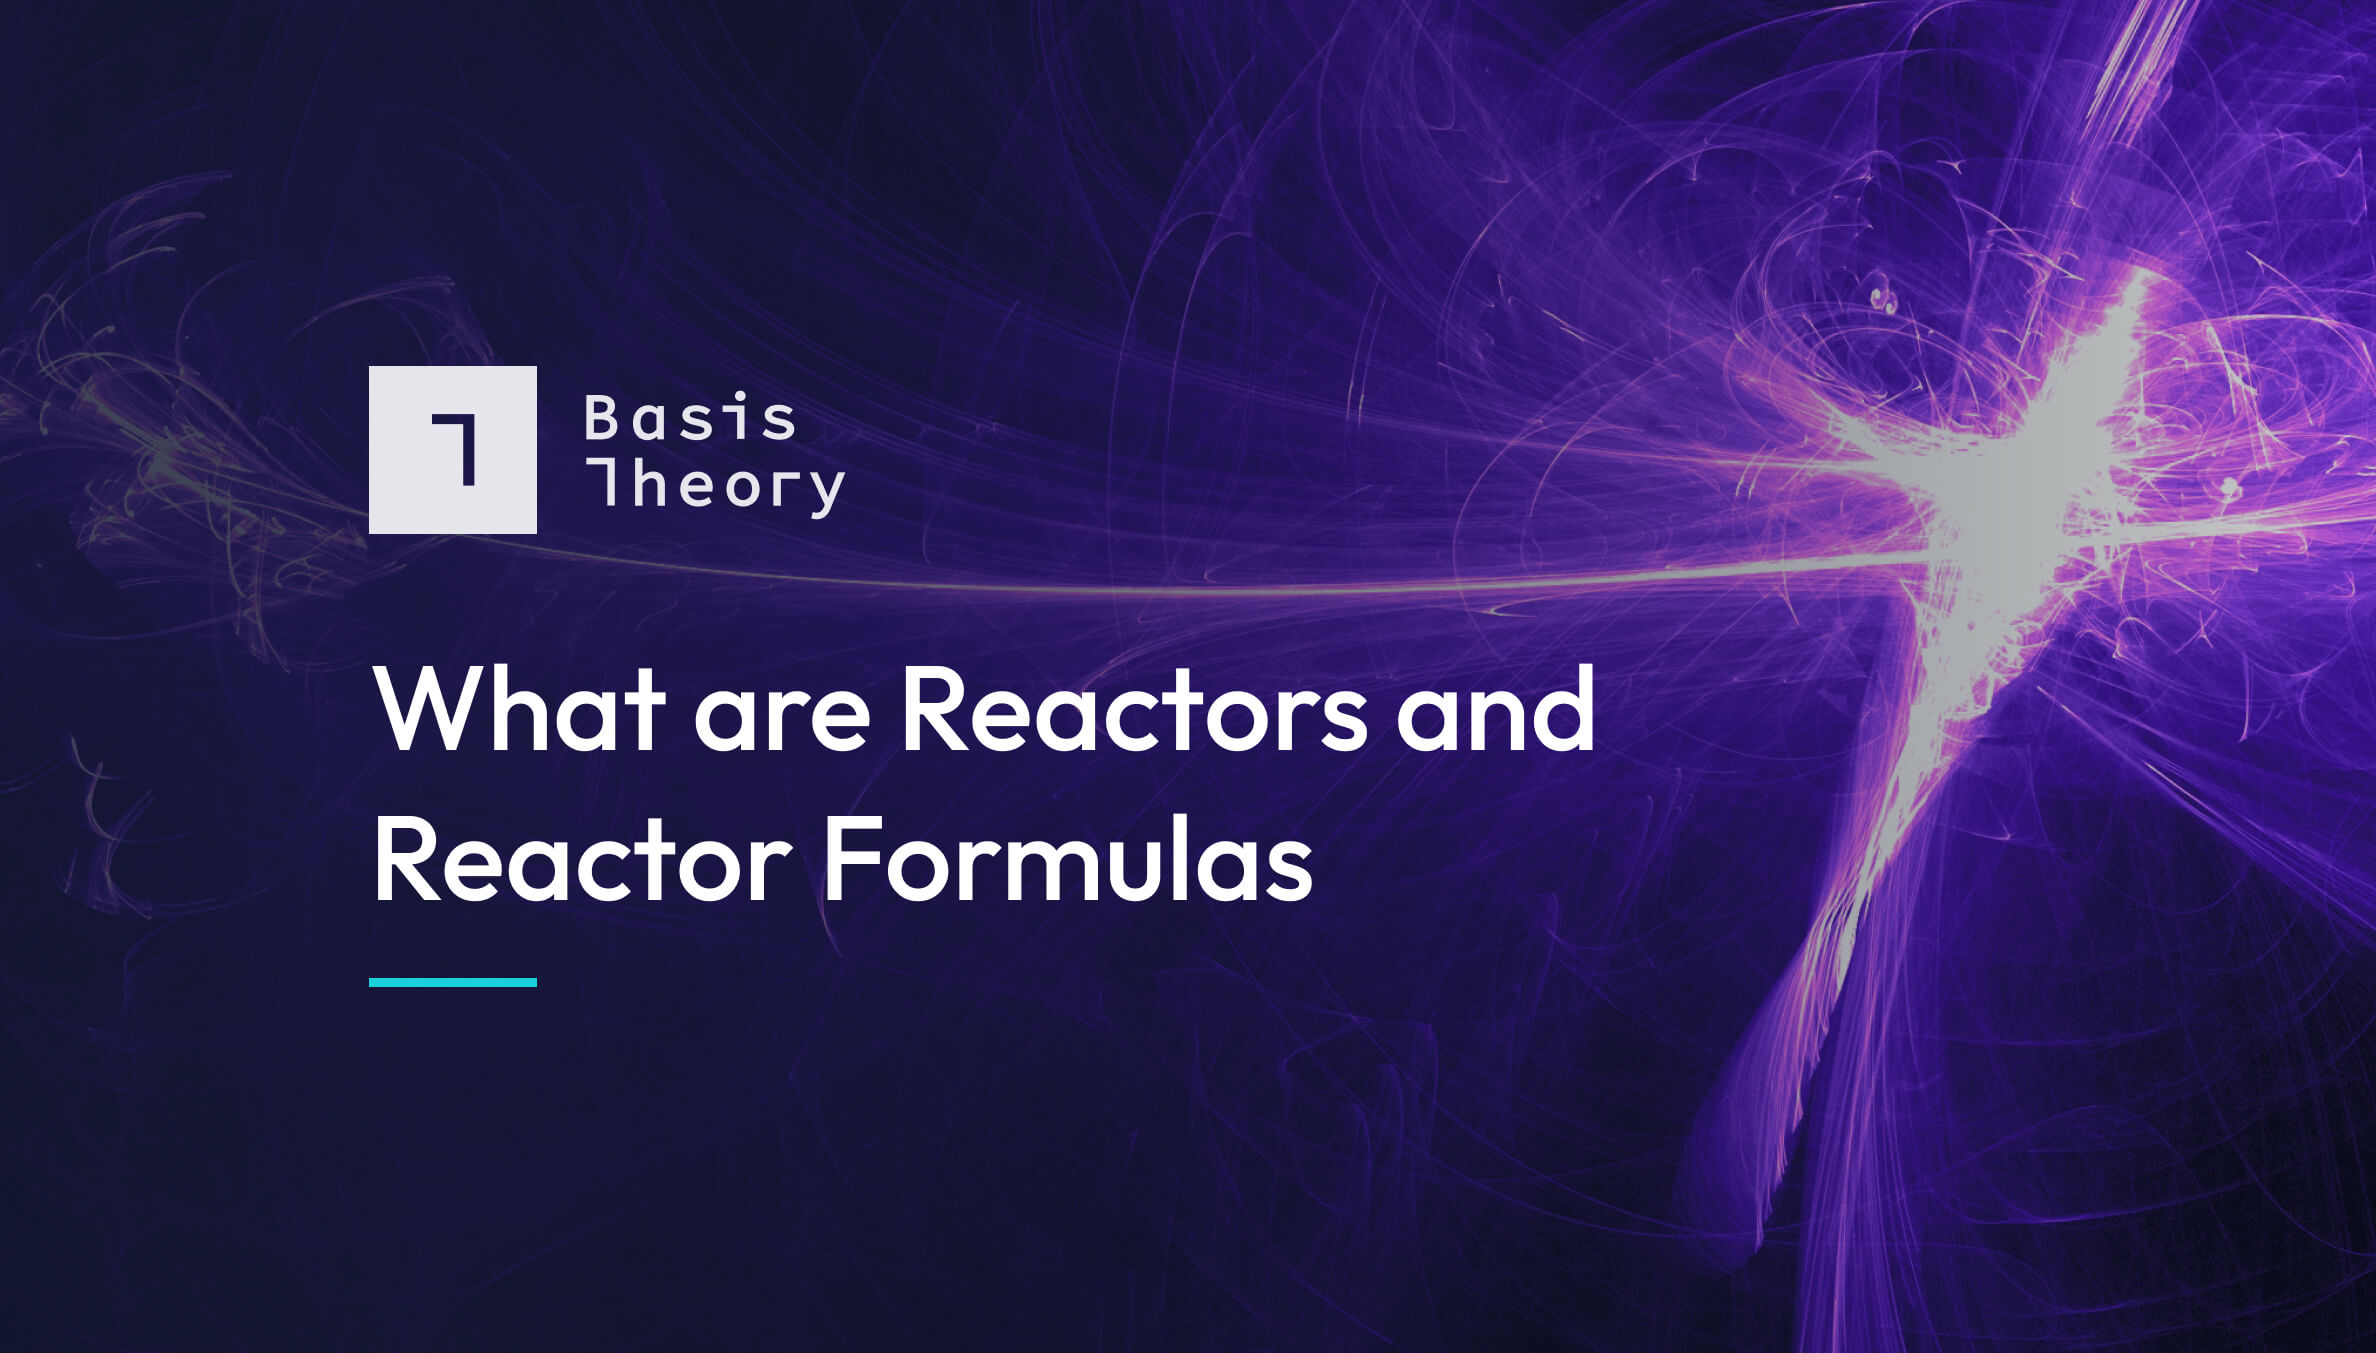 What are Reactors and Reactor formulas?